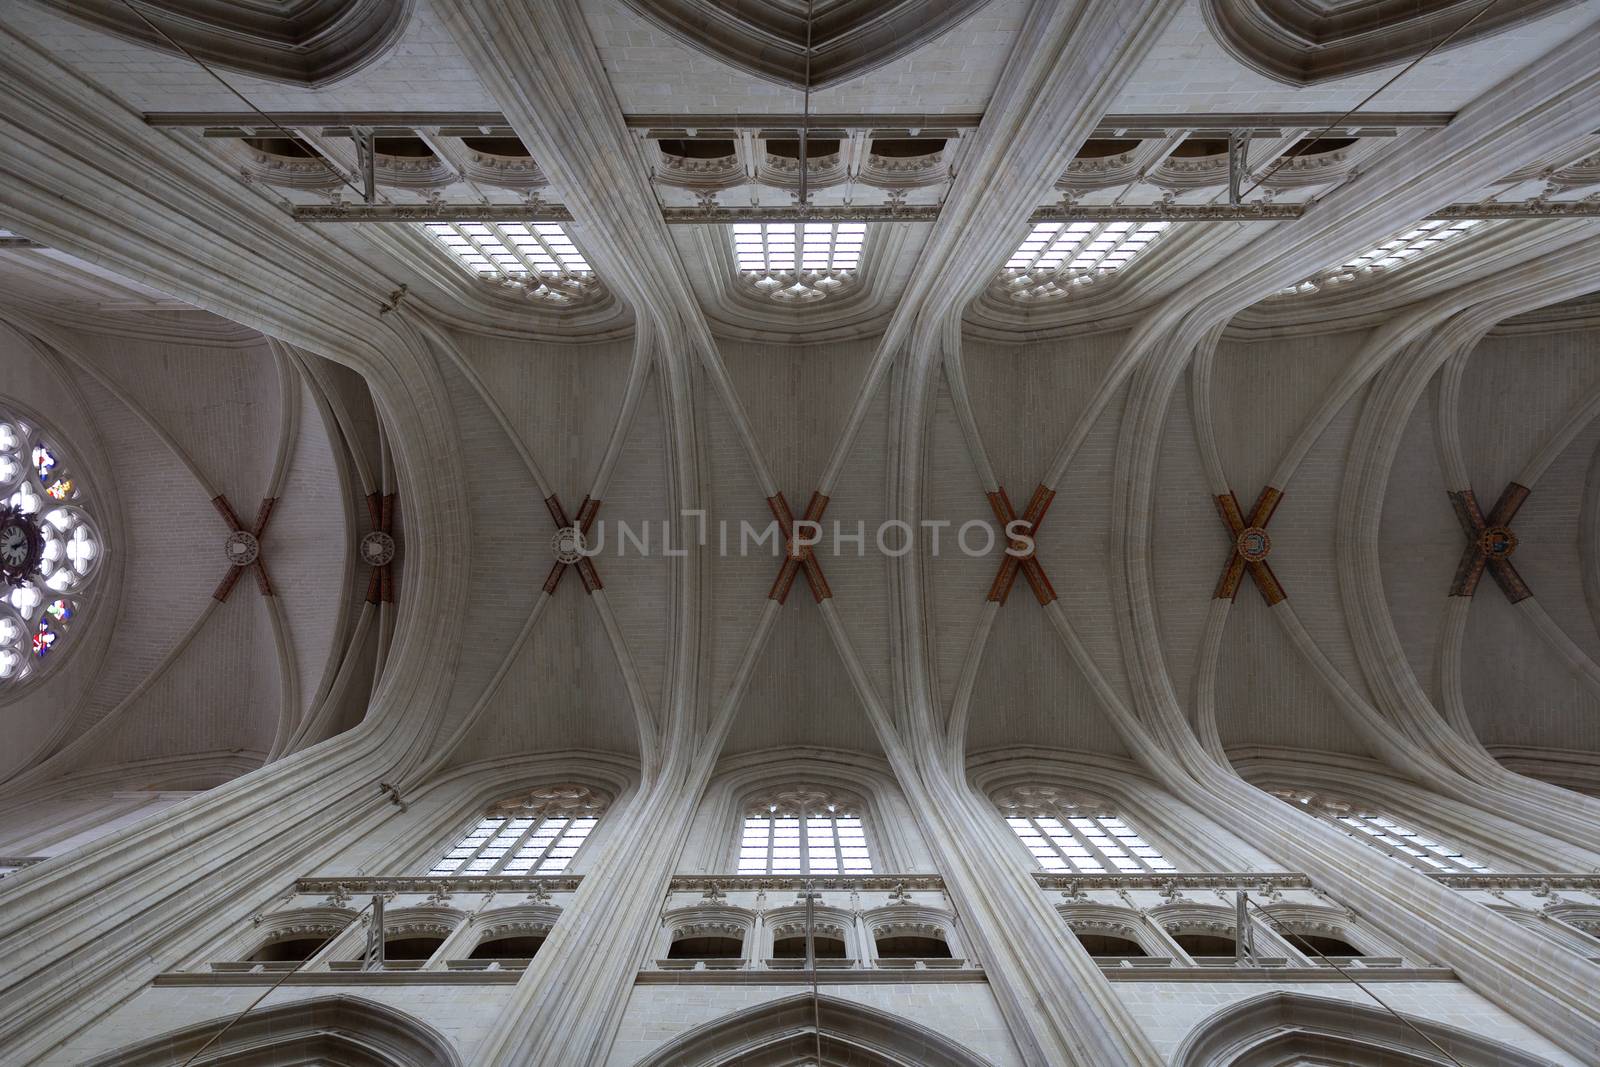 Ceiling of Nantes Cathedral, Cathedral of St. Peter and St. Paul of Nantes, Nantes, France by vlad-m